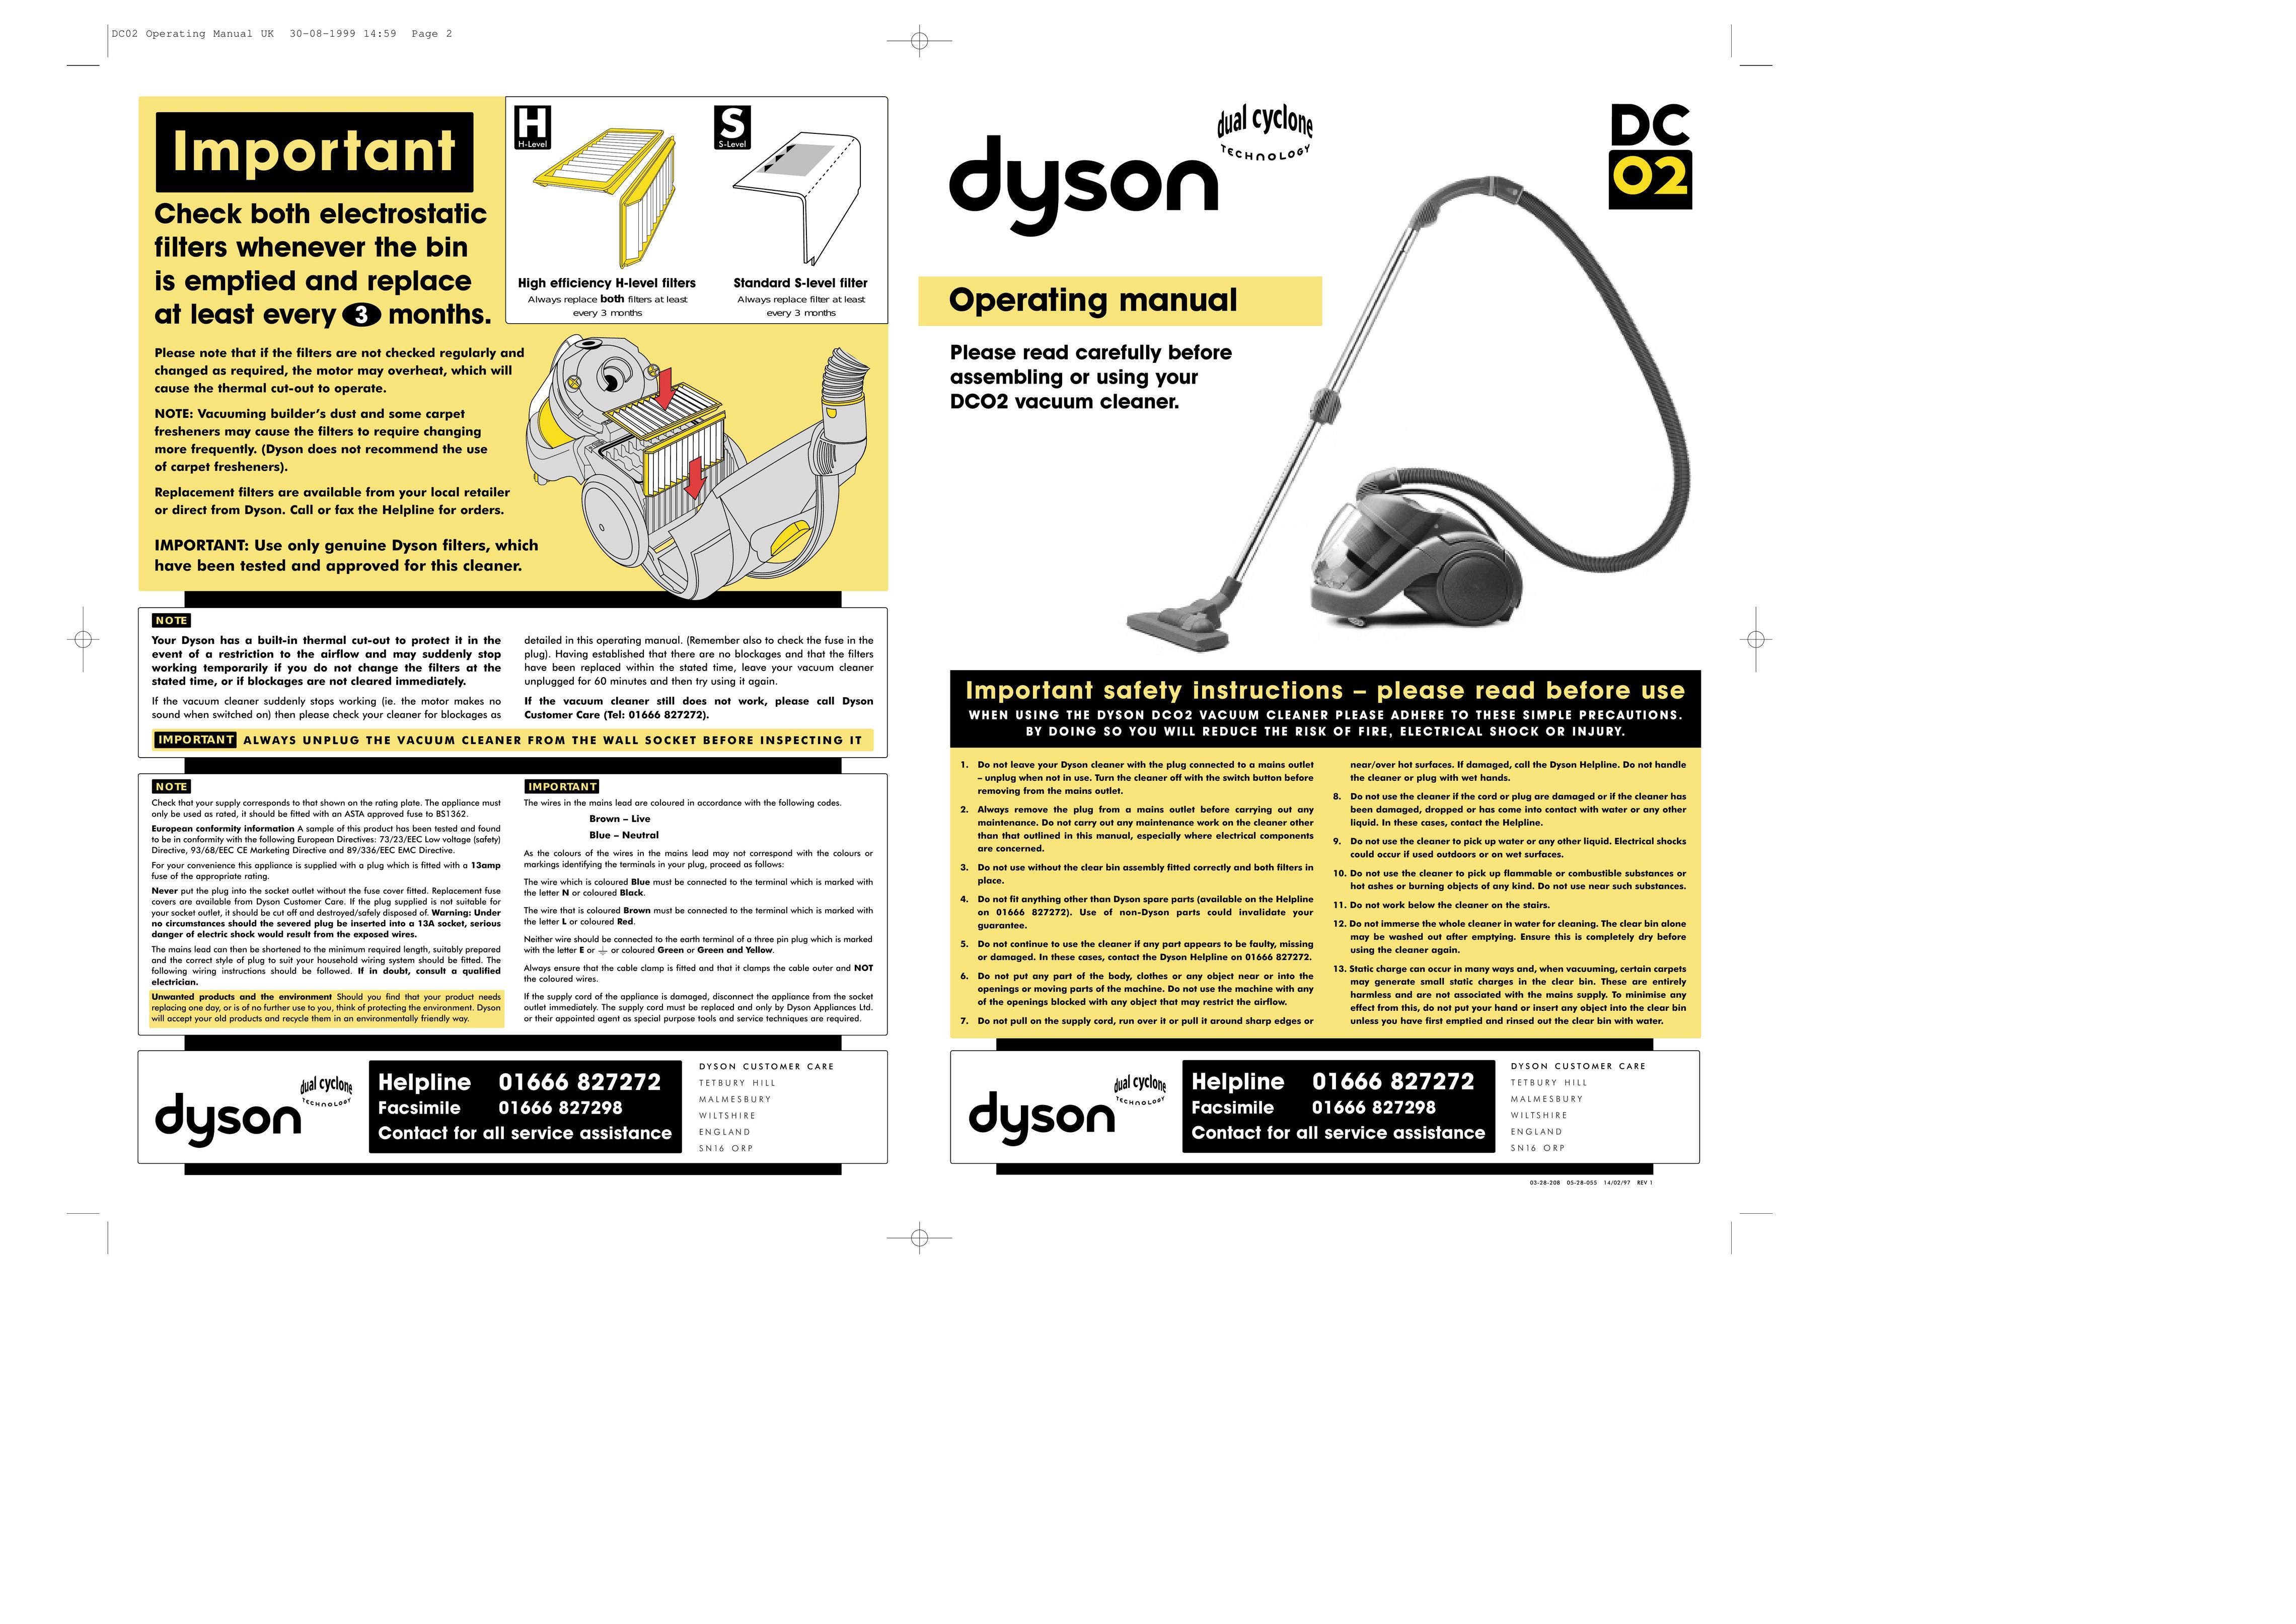 Dyson DC02 Vacuum Cleaner User Manual